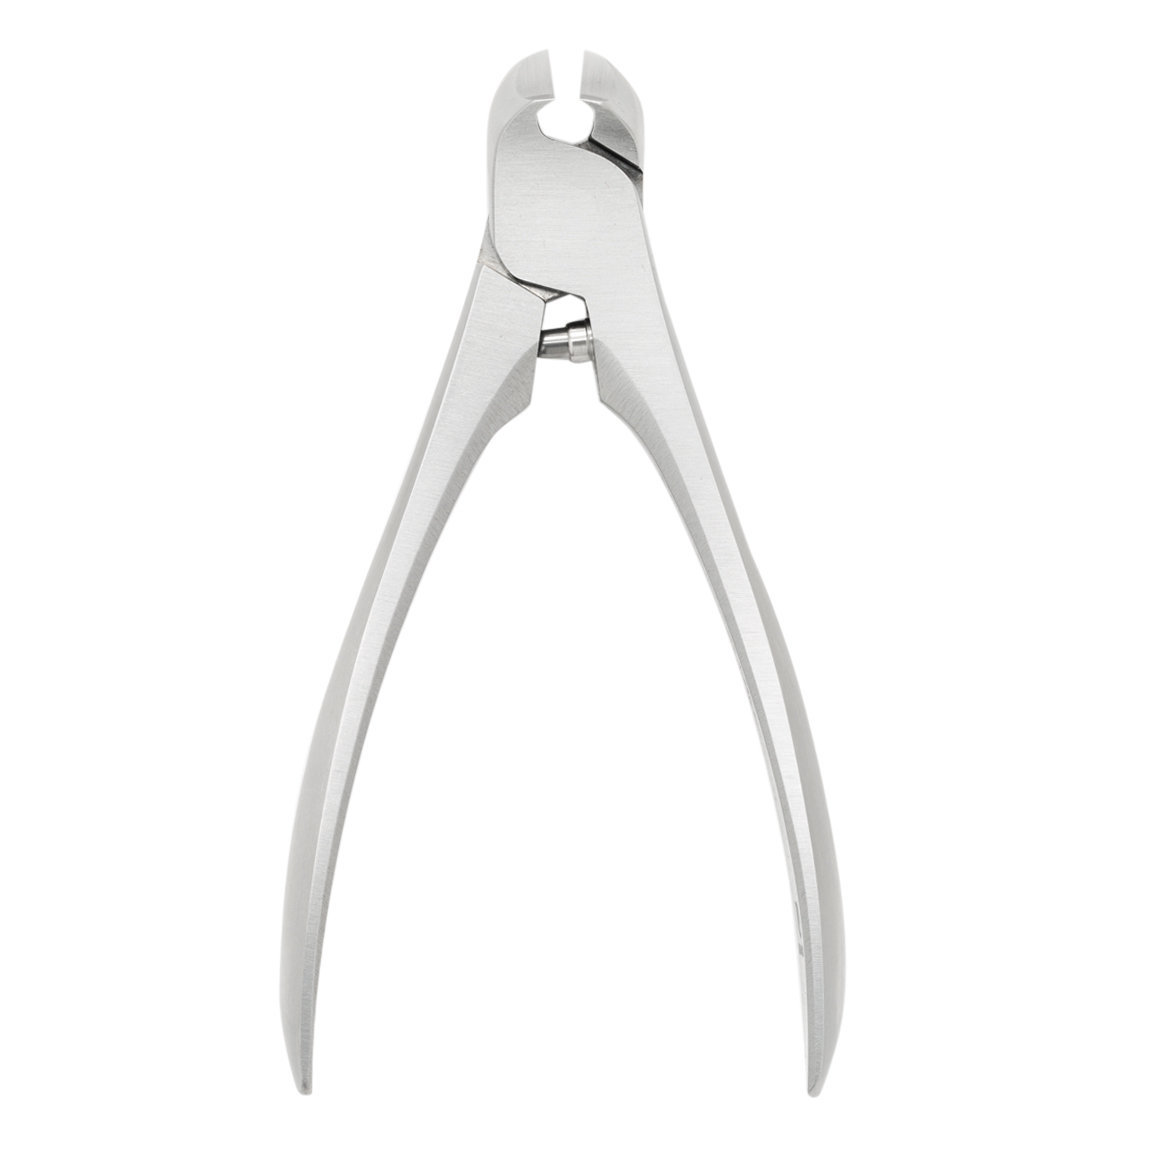 Suwada Nail Nipper Classic Round Tip alternative view 1 - product swatch.